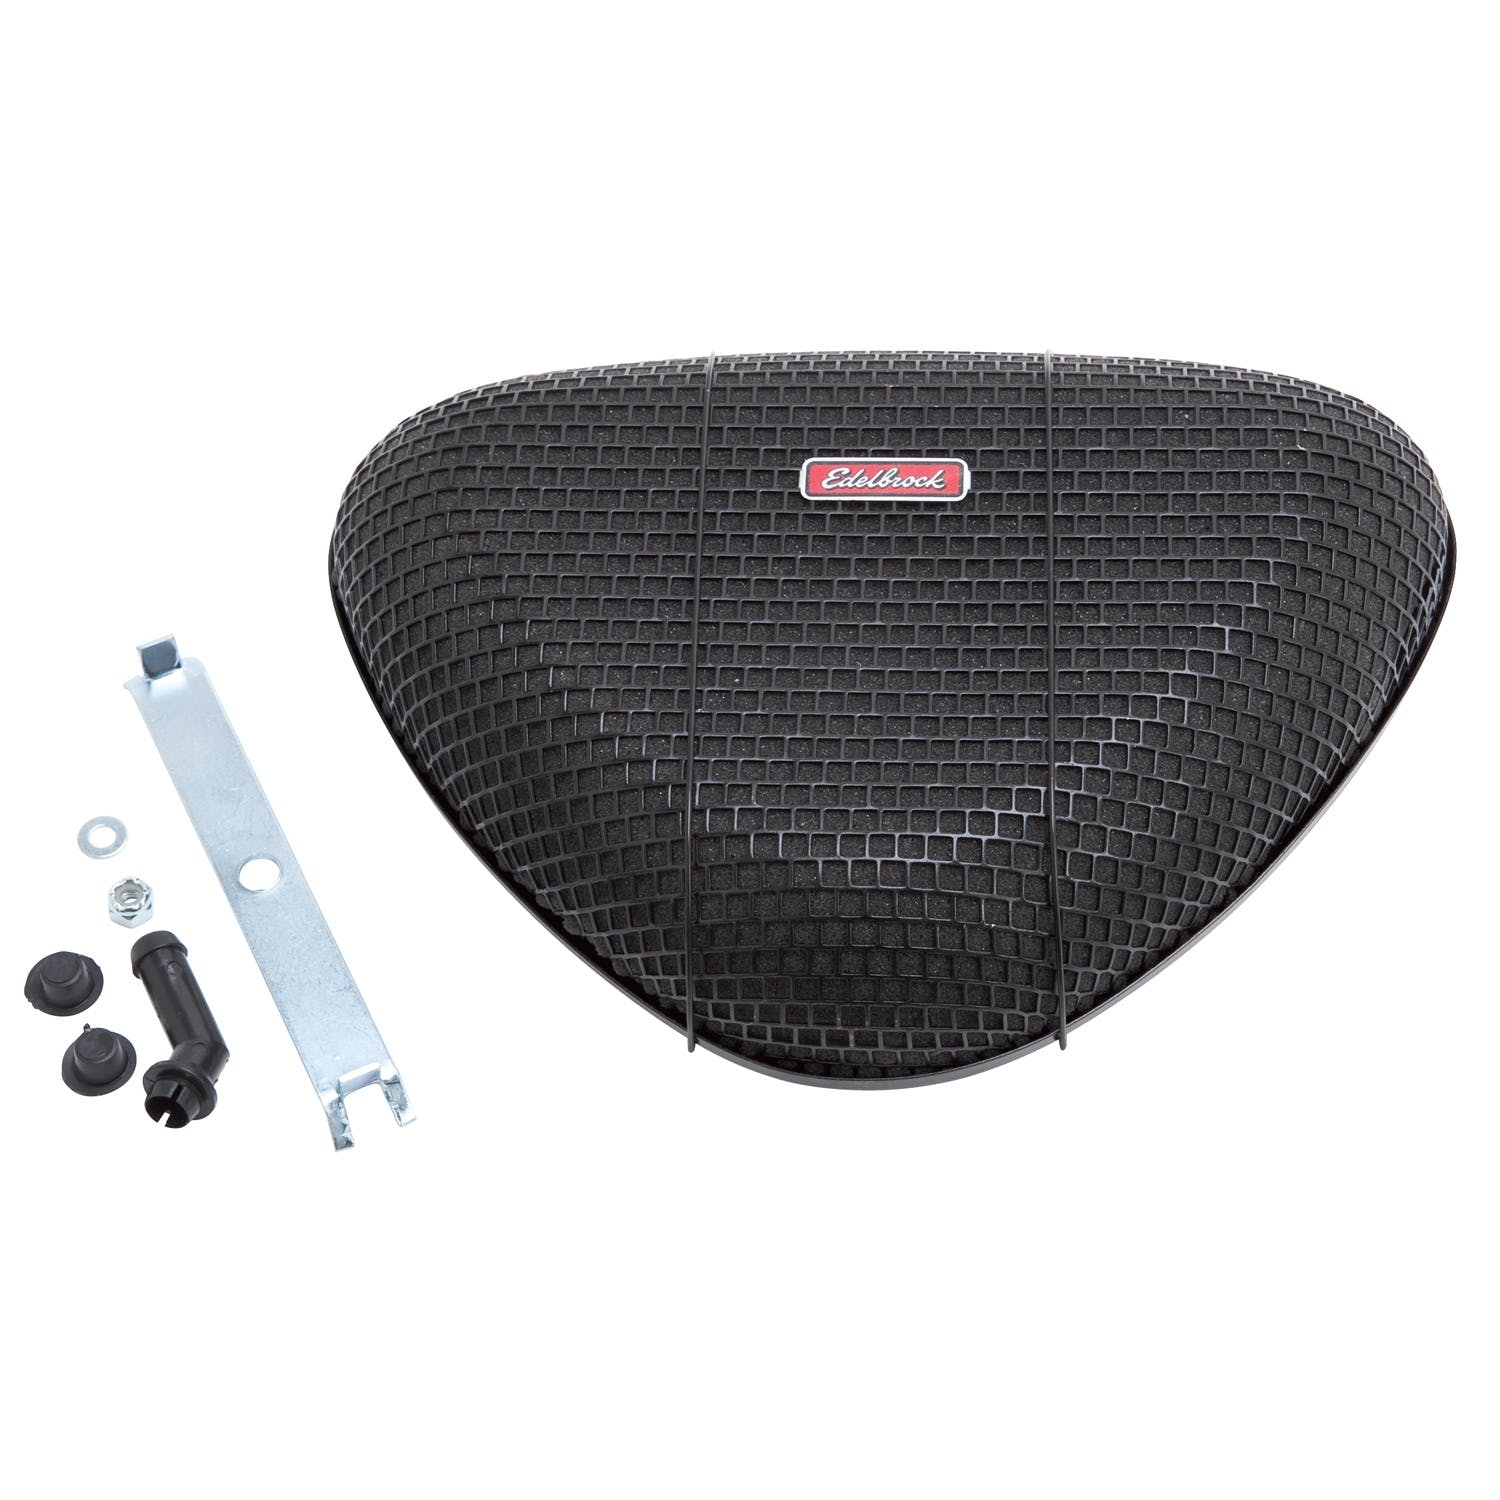 Edelbrock 10023 Pro-Flo 1000 Series Black Air Cleaner and Foam Element for 4-bbl Carb - 5-1/8 AH